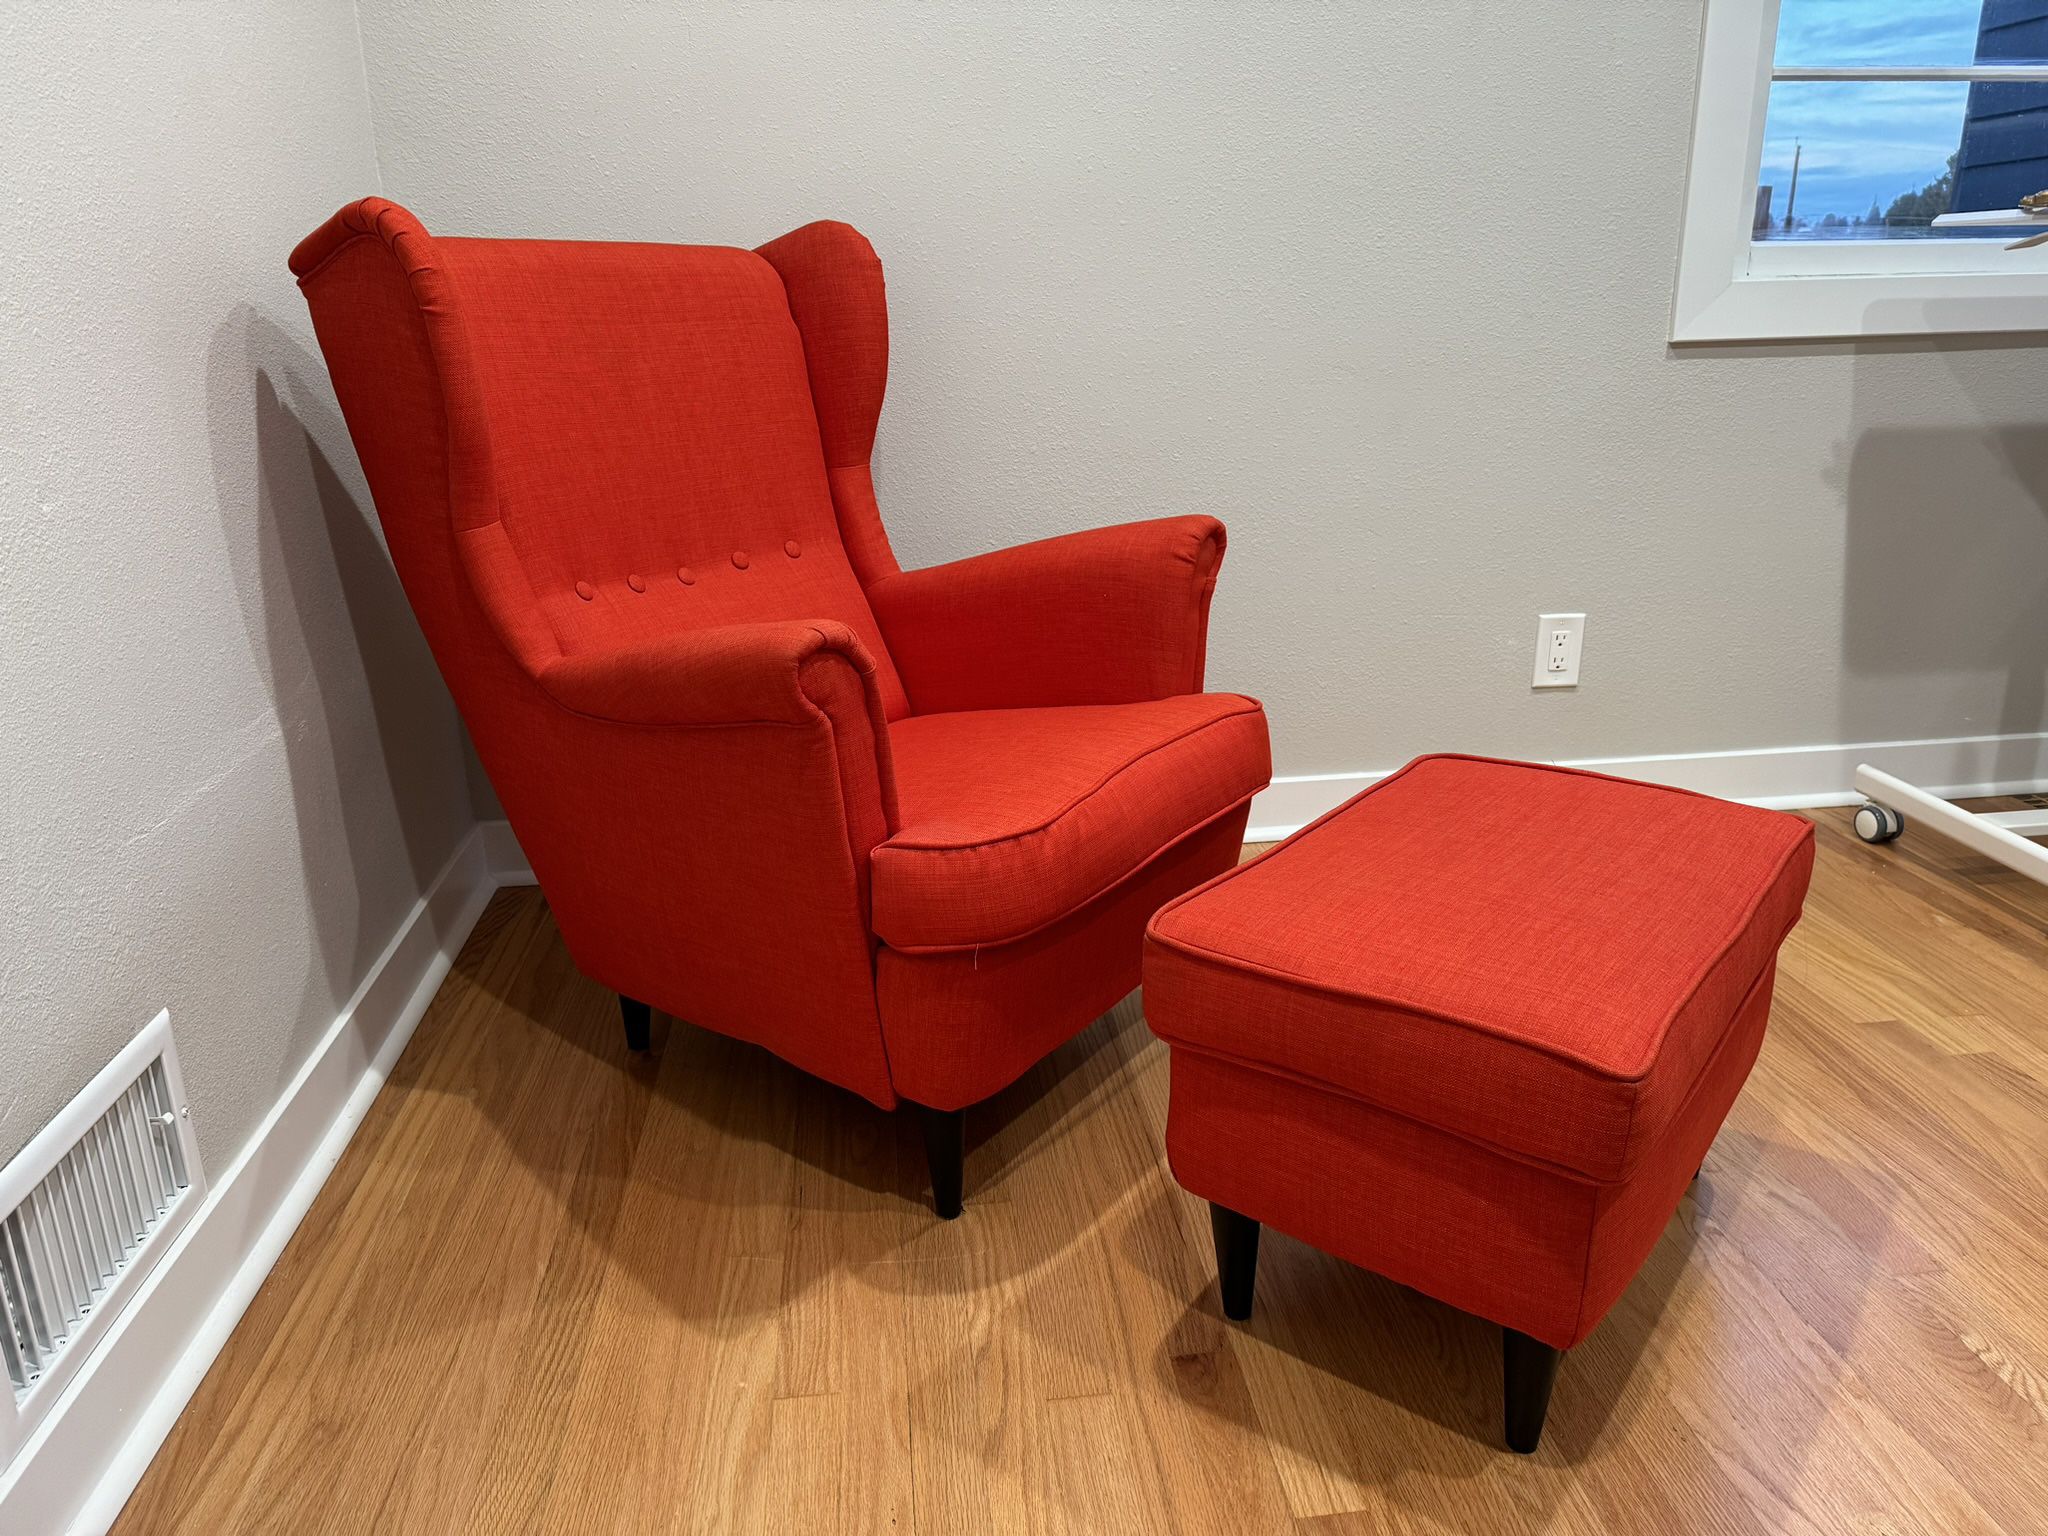 Ikea wingback chair and ottoman